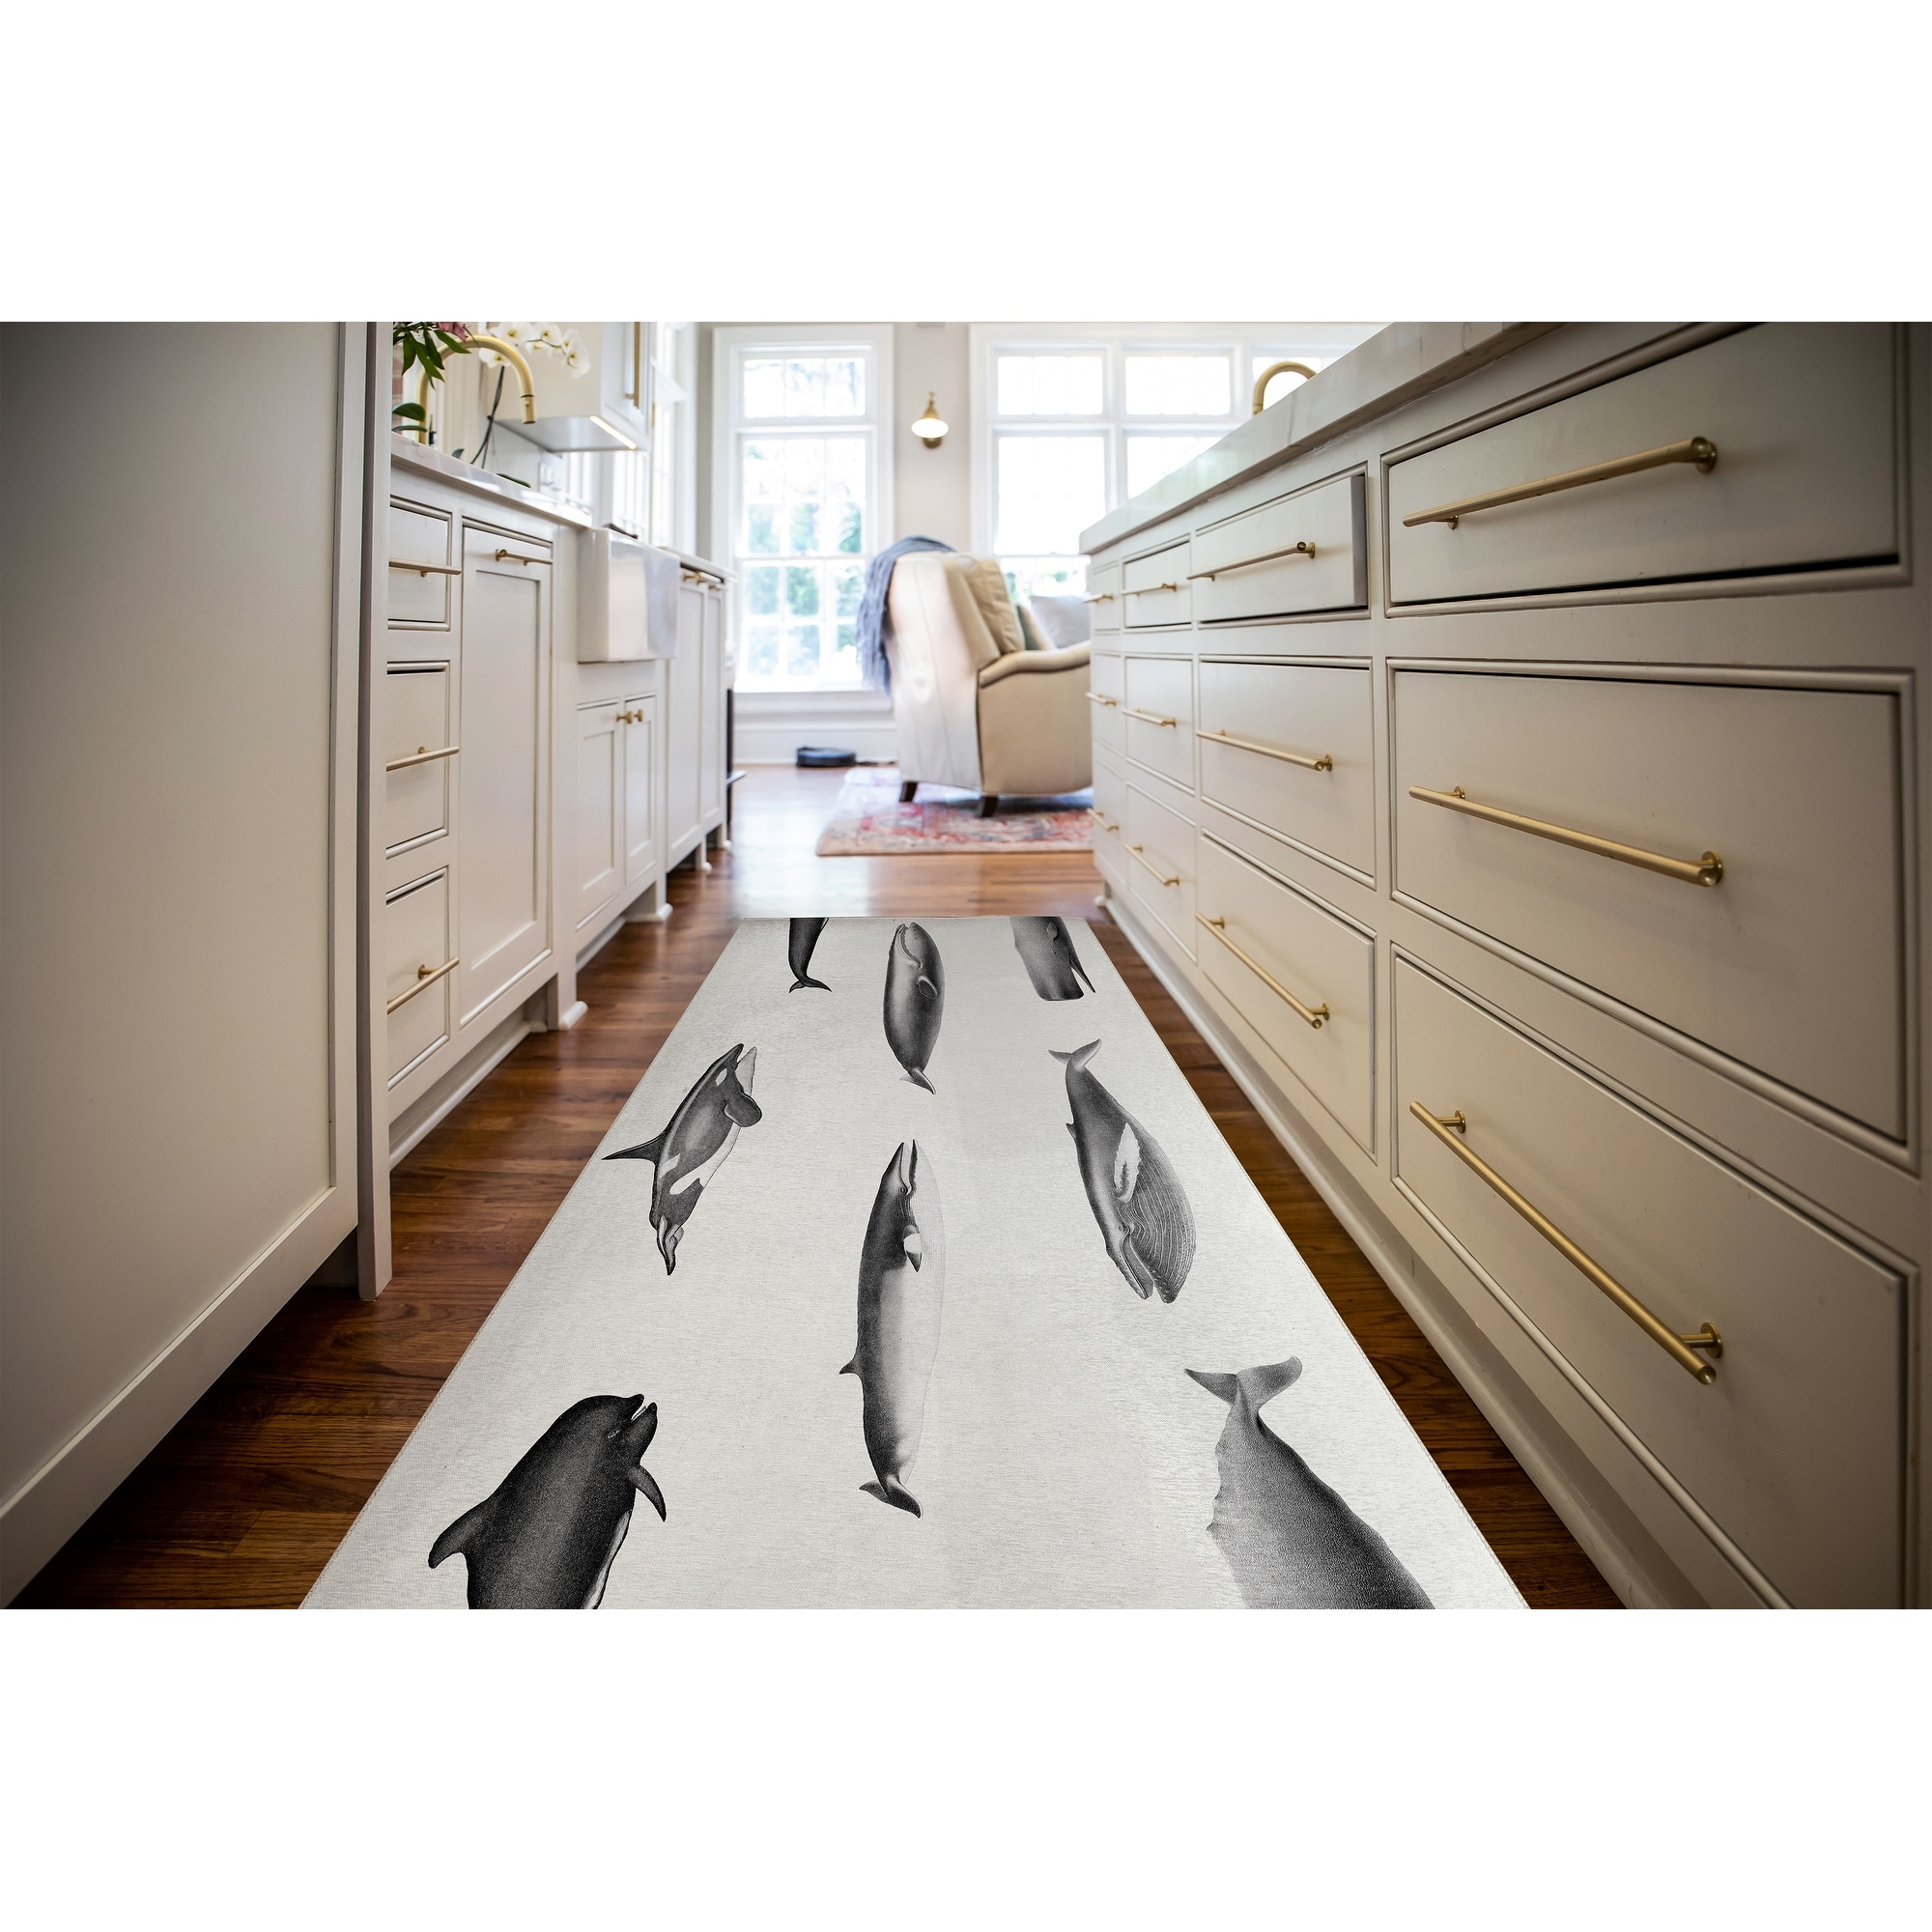 https://ak1.ostkcdn.com/images/products/is/images/direct/ac394068df00d269c930223b6f3412762eb7e2a2/WHALES-CHARCOAL-Kitchen-Mat-By-Becky-Bailey.jpg